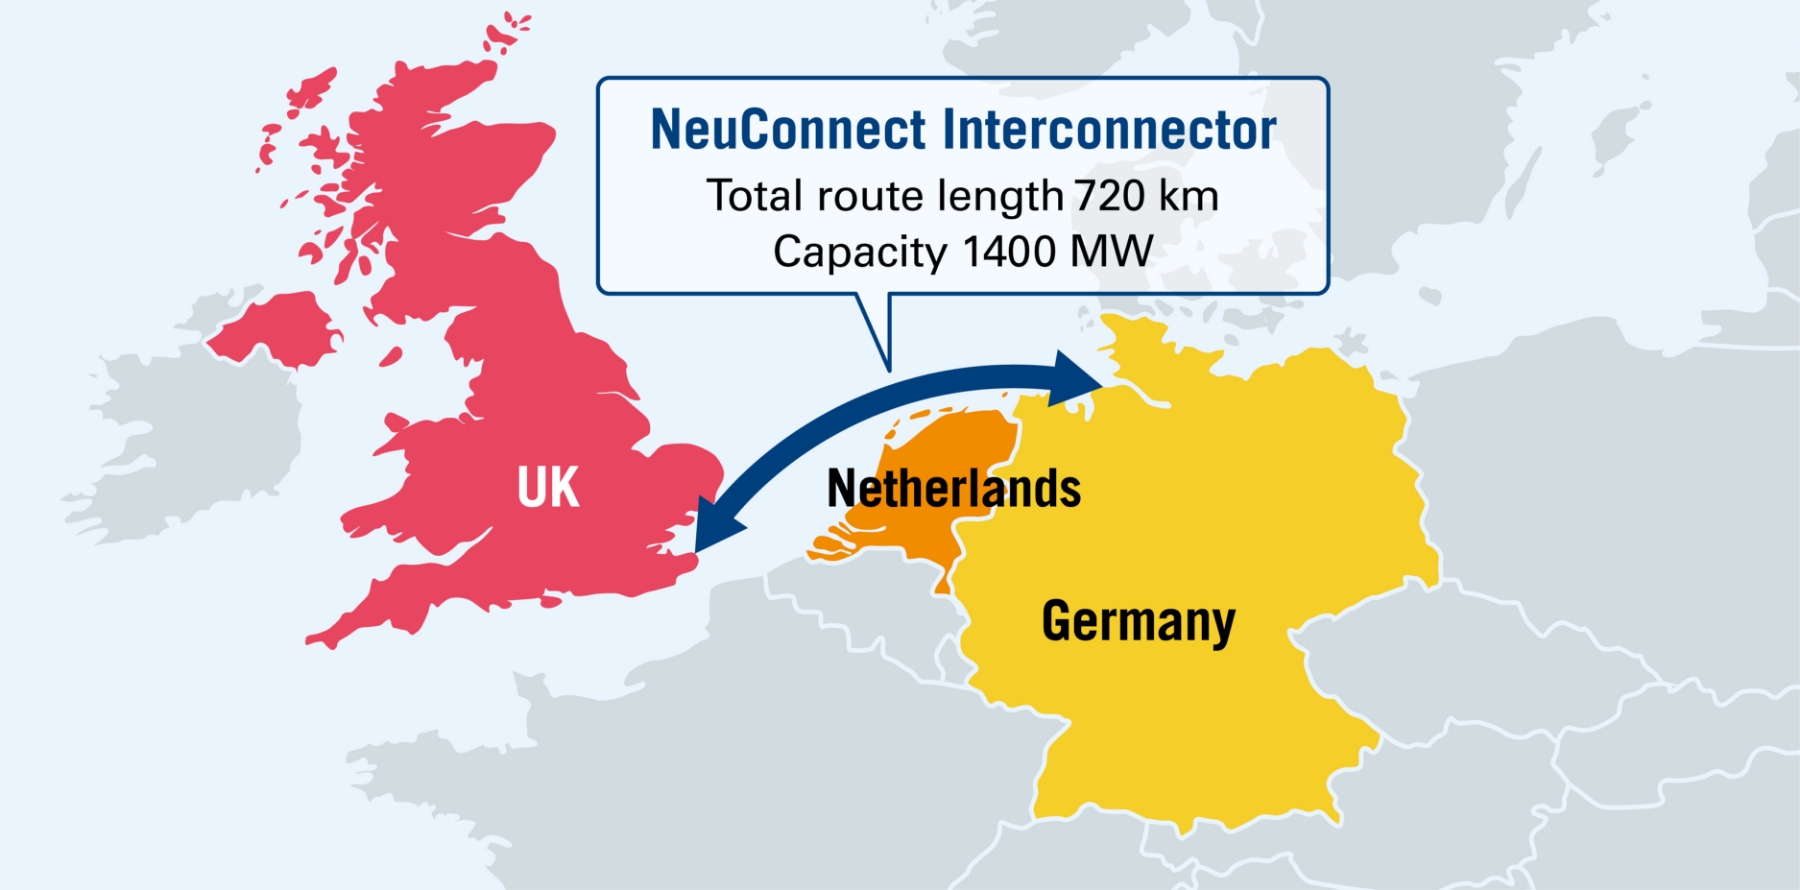 Image of NeuConnect interconnector